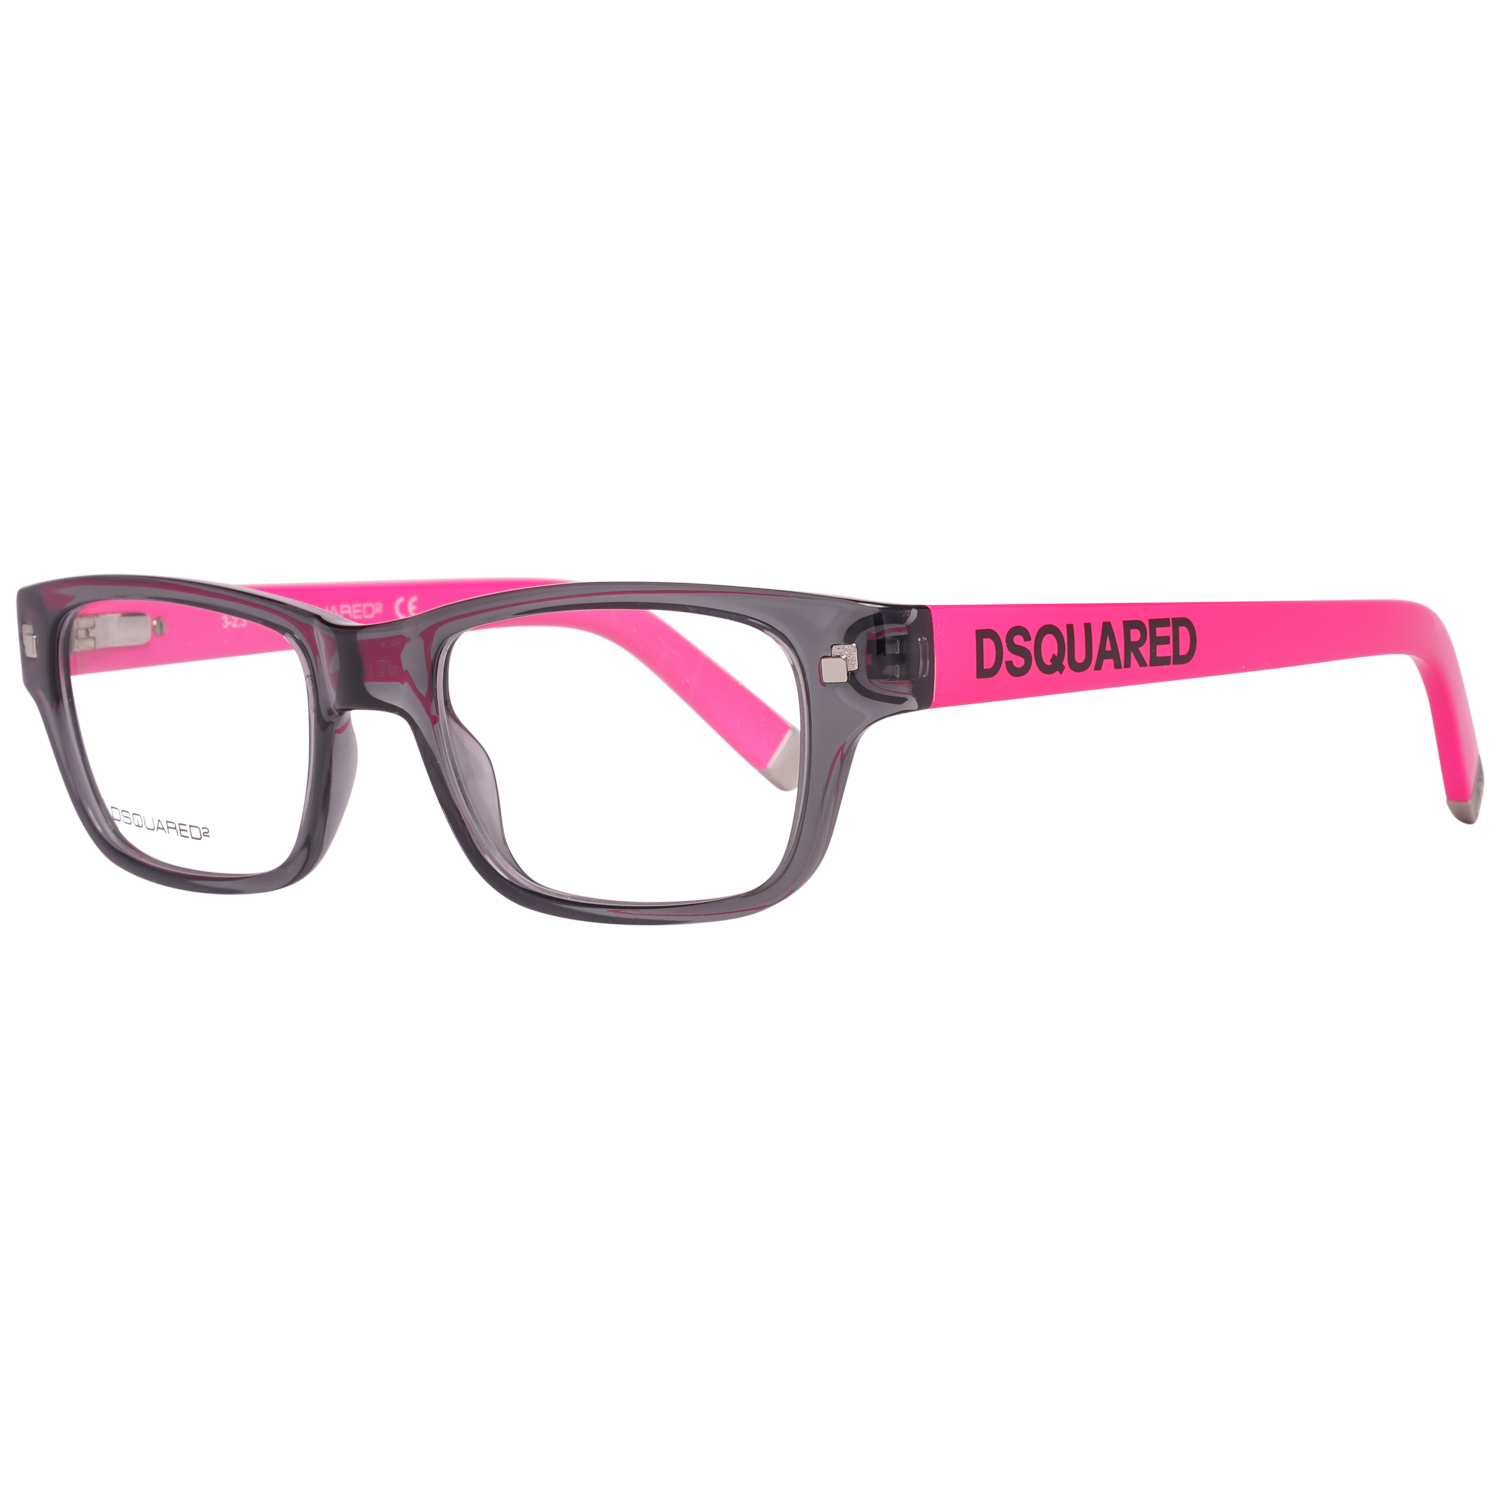 Dsquared2 Optical Frame DQ5031 020 50